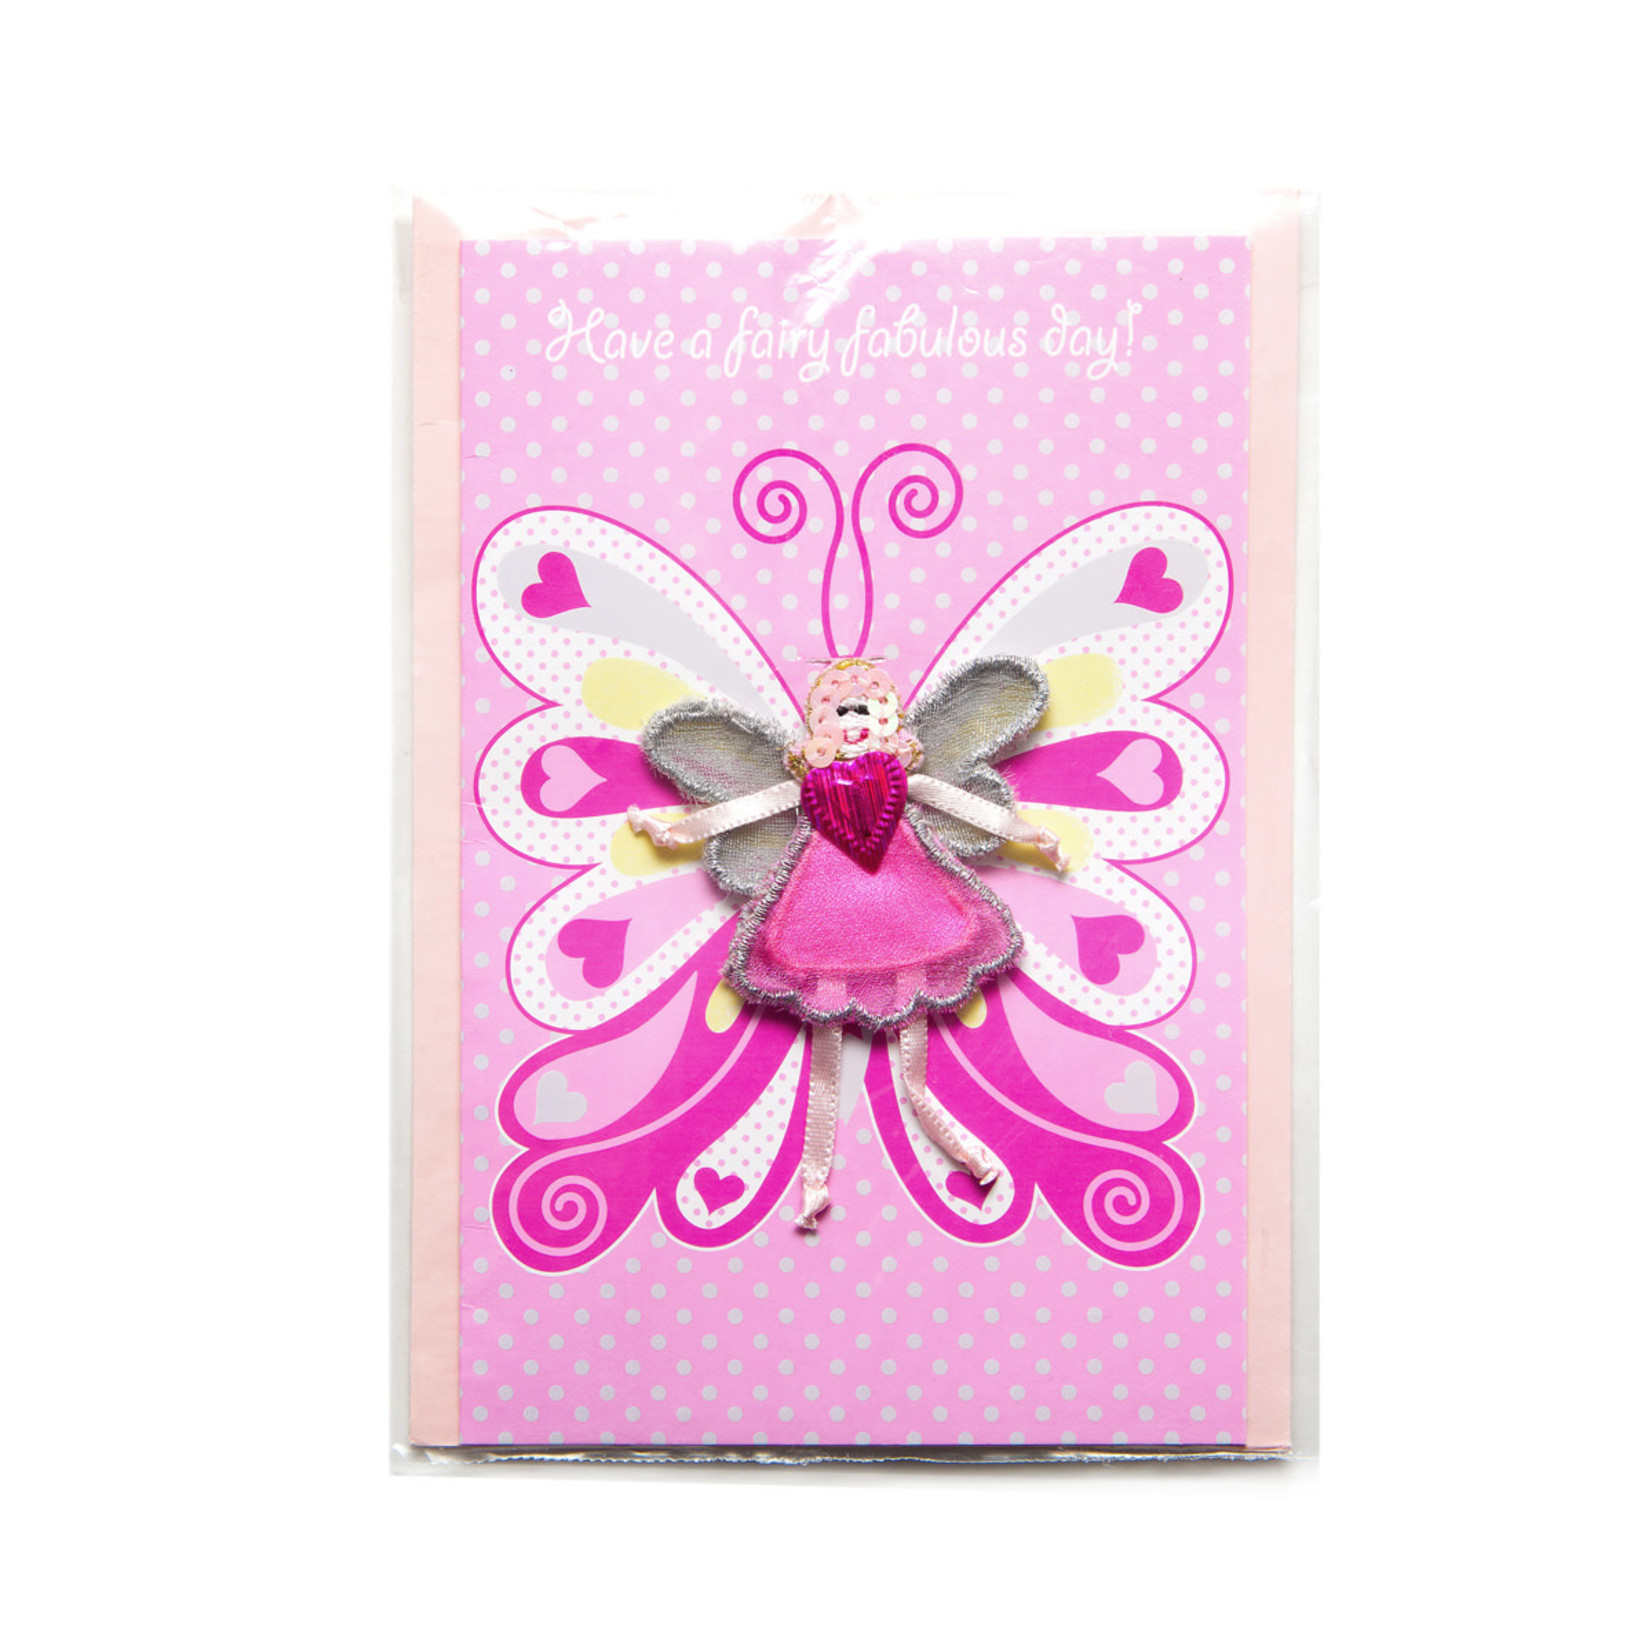 Believe You Can Have a Fairy Fabulous Day - Greeting Card